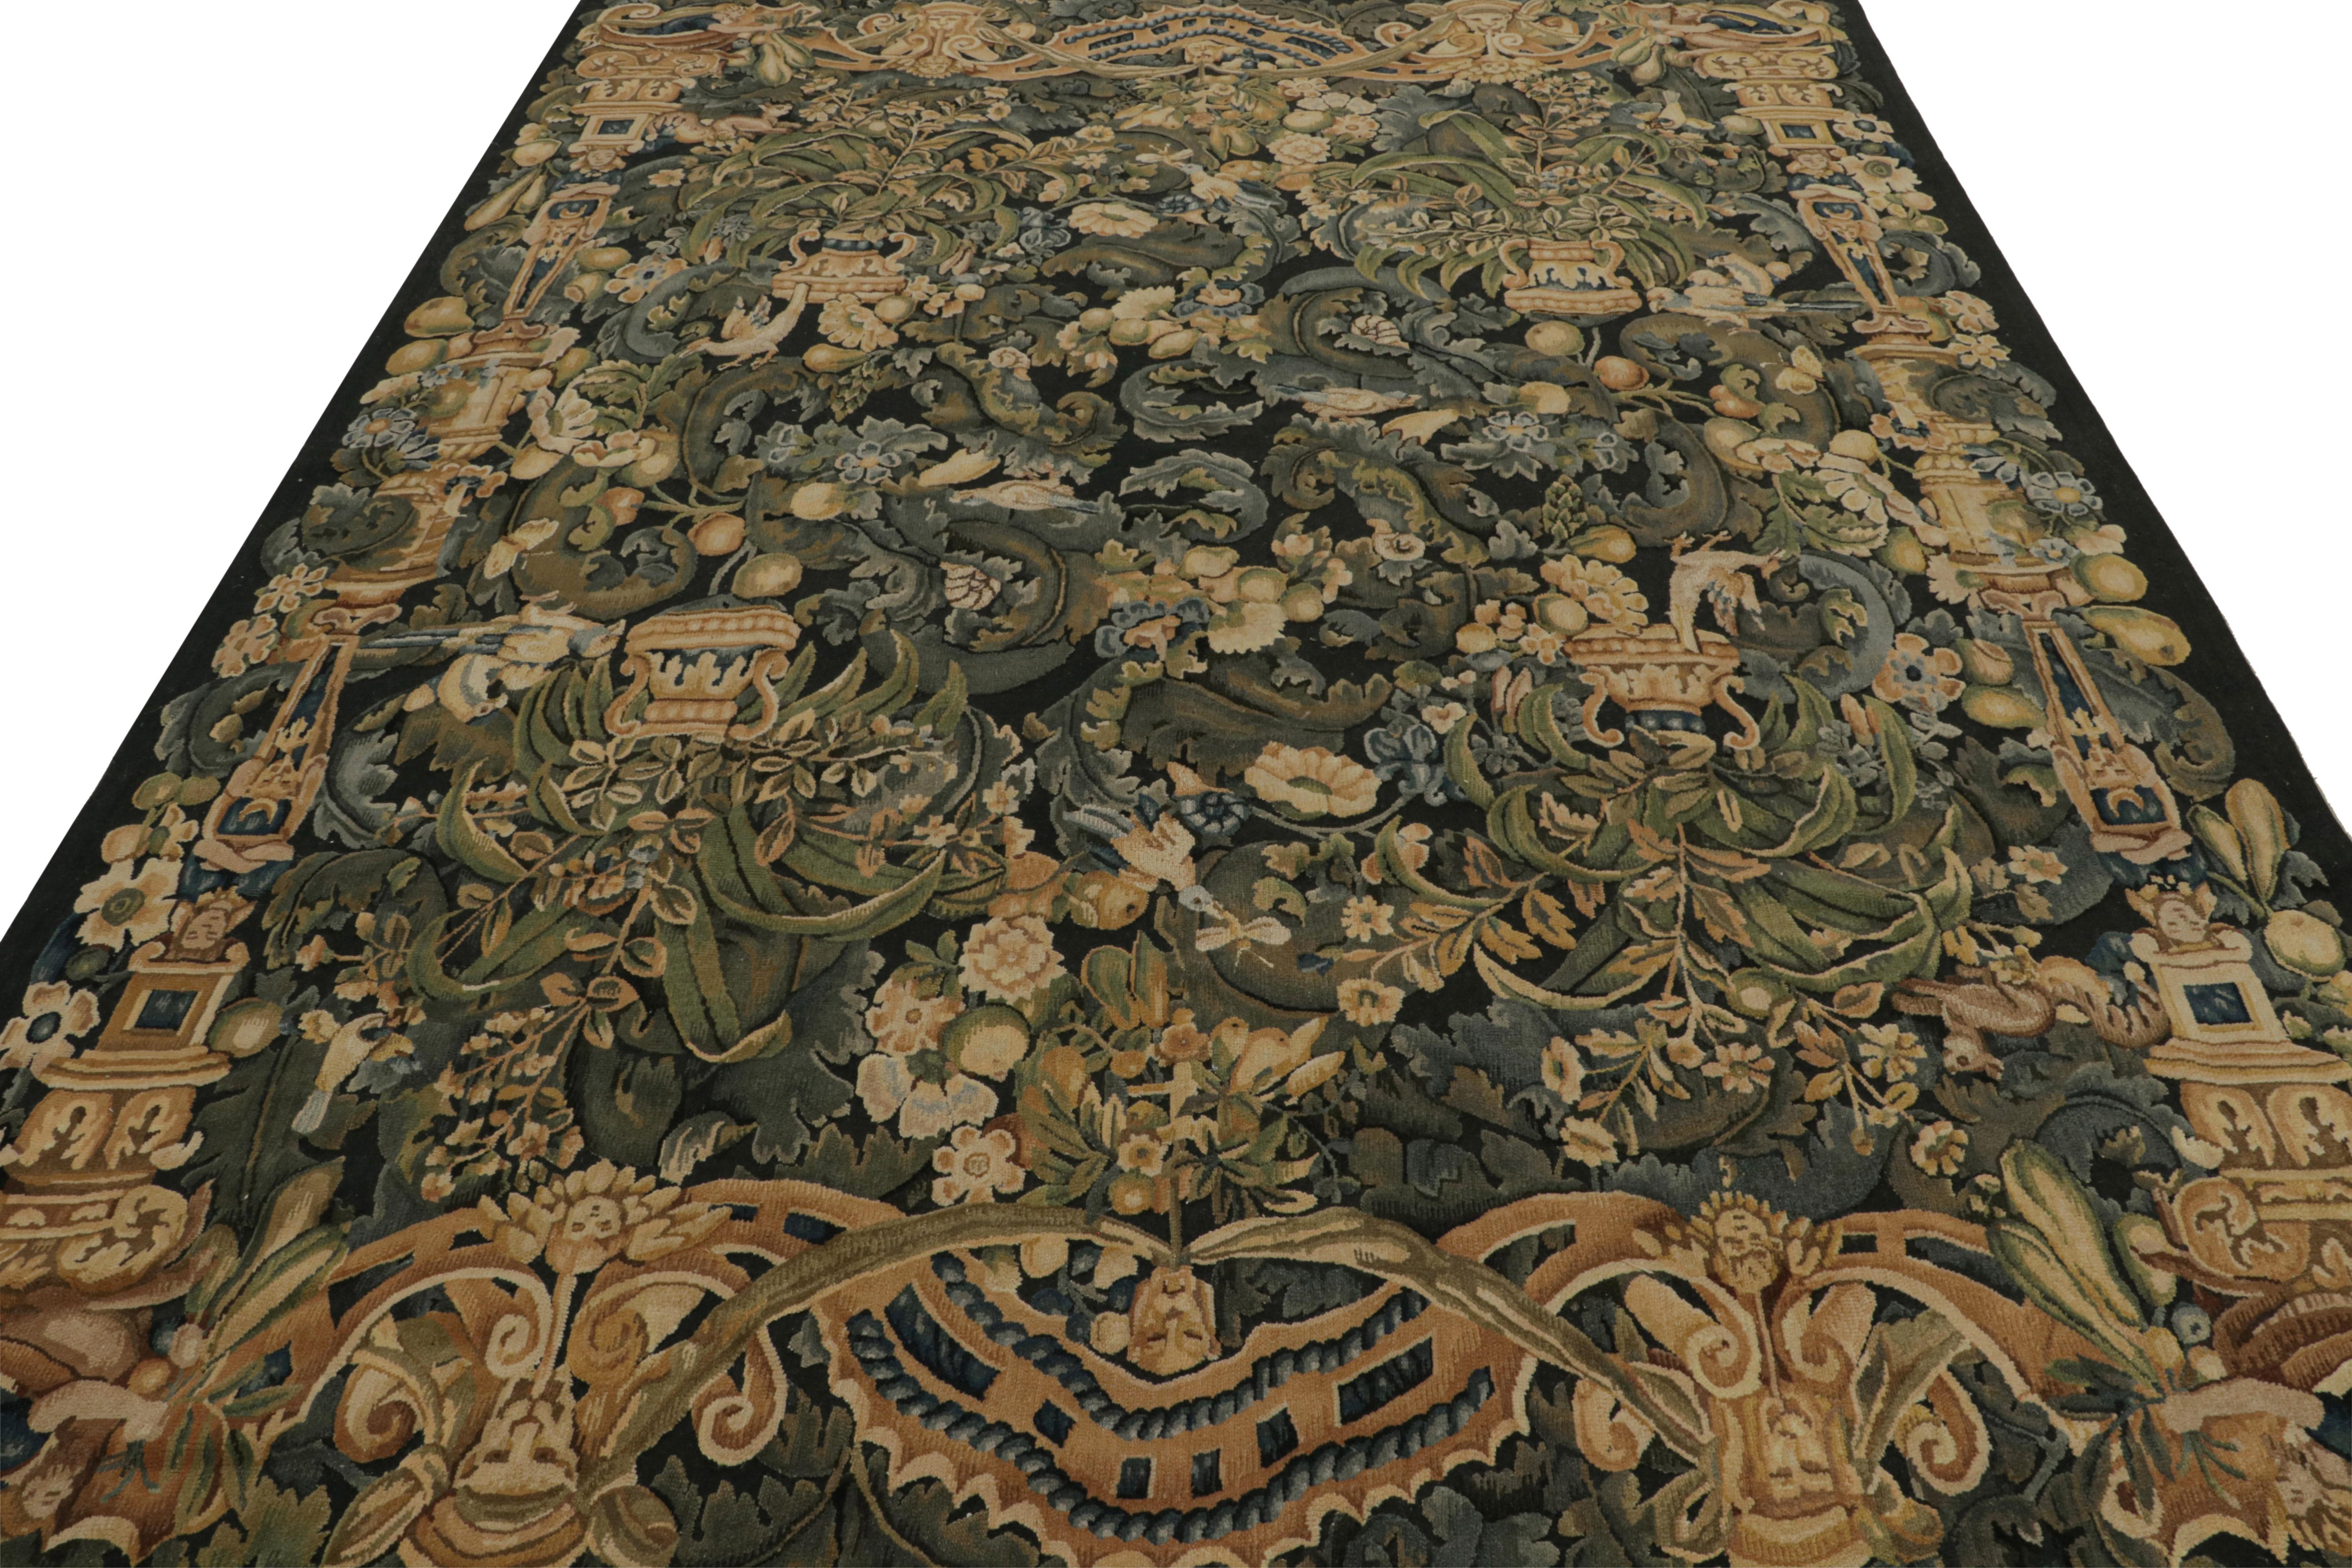 Modern Rug & Kilim’s European Tudor Flatweave Rug with Floral Patterns and Pictorials For Sale